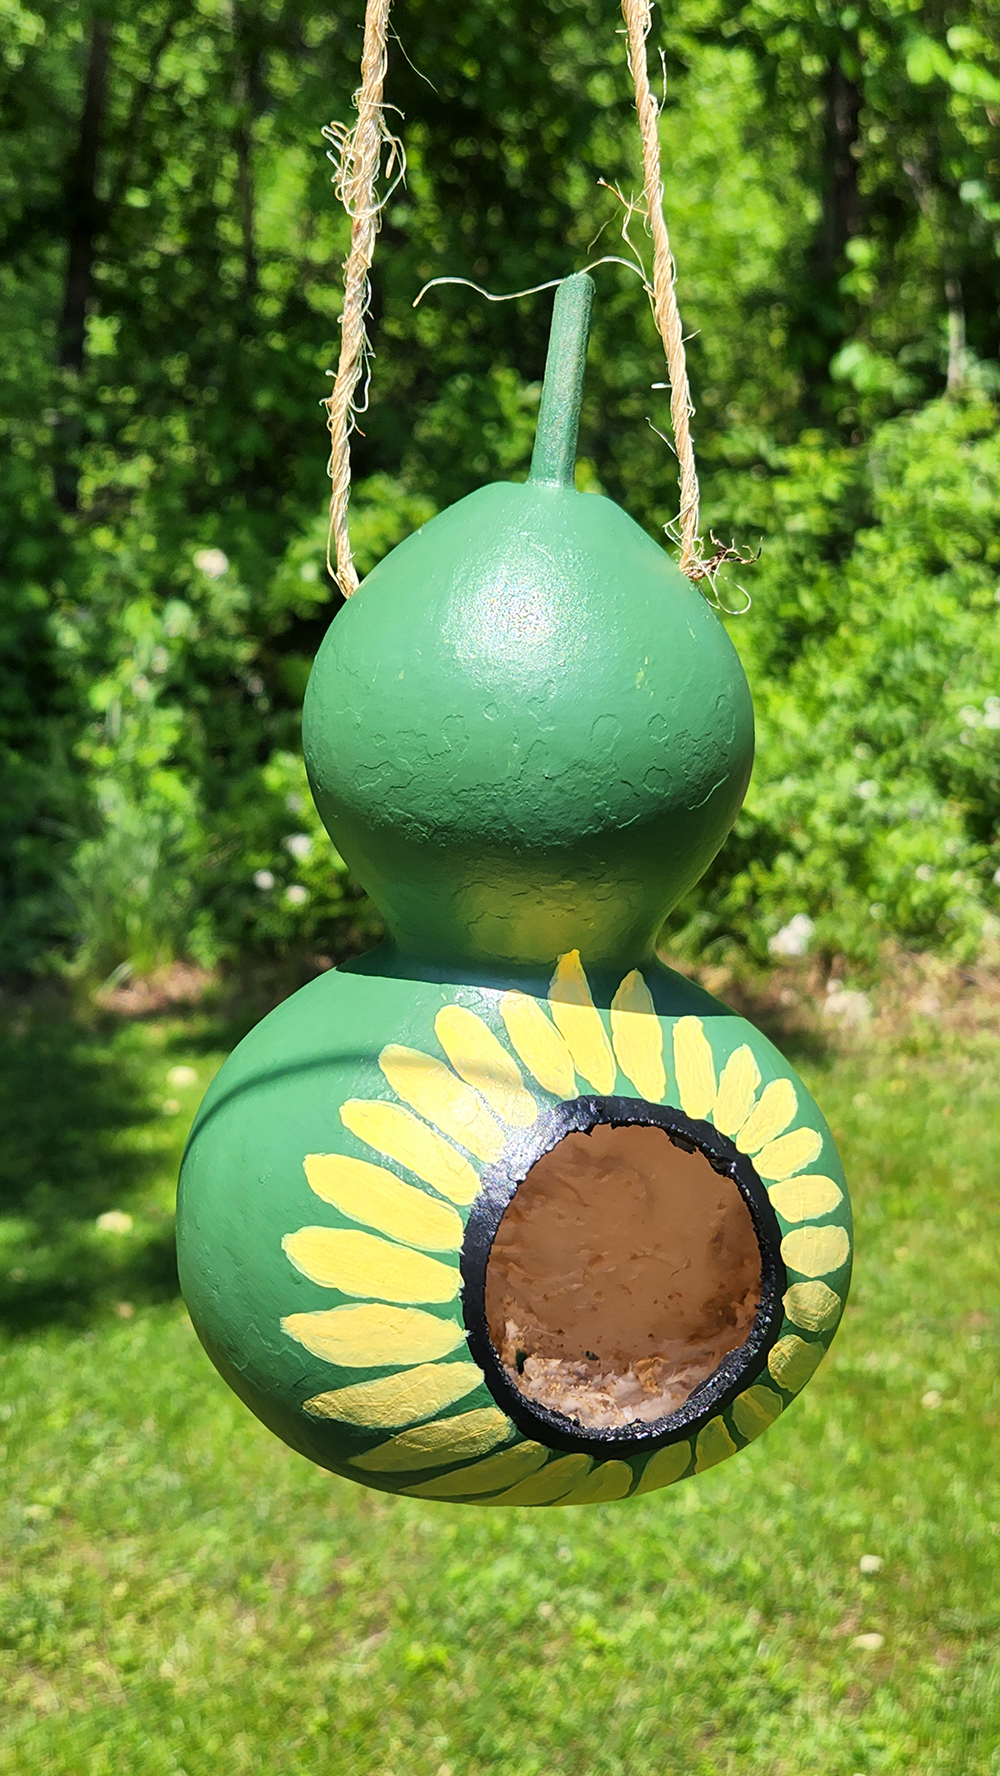 DIY gourd birdhouse hanging outside by bushes